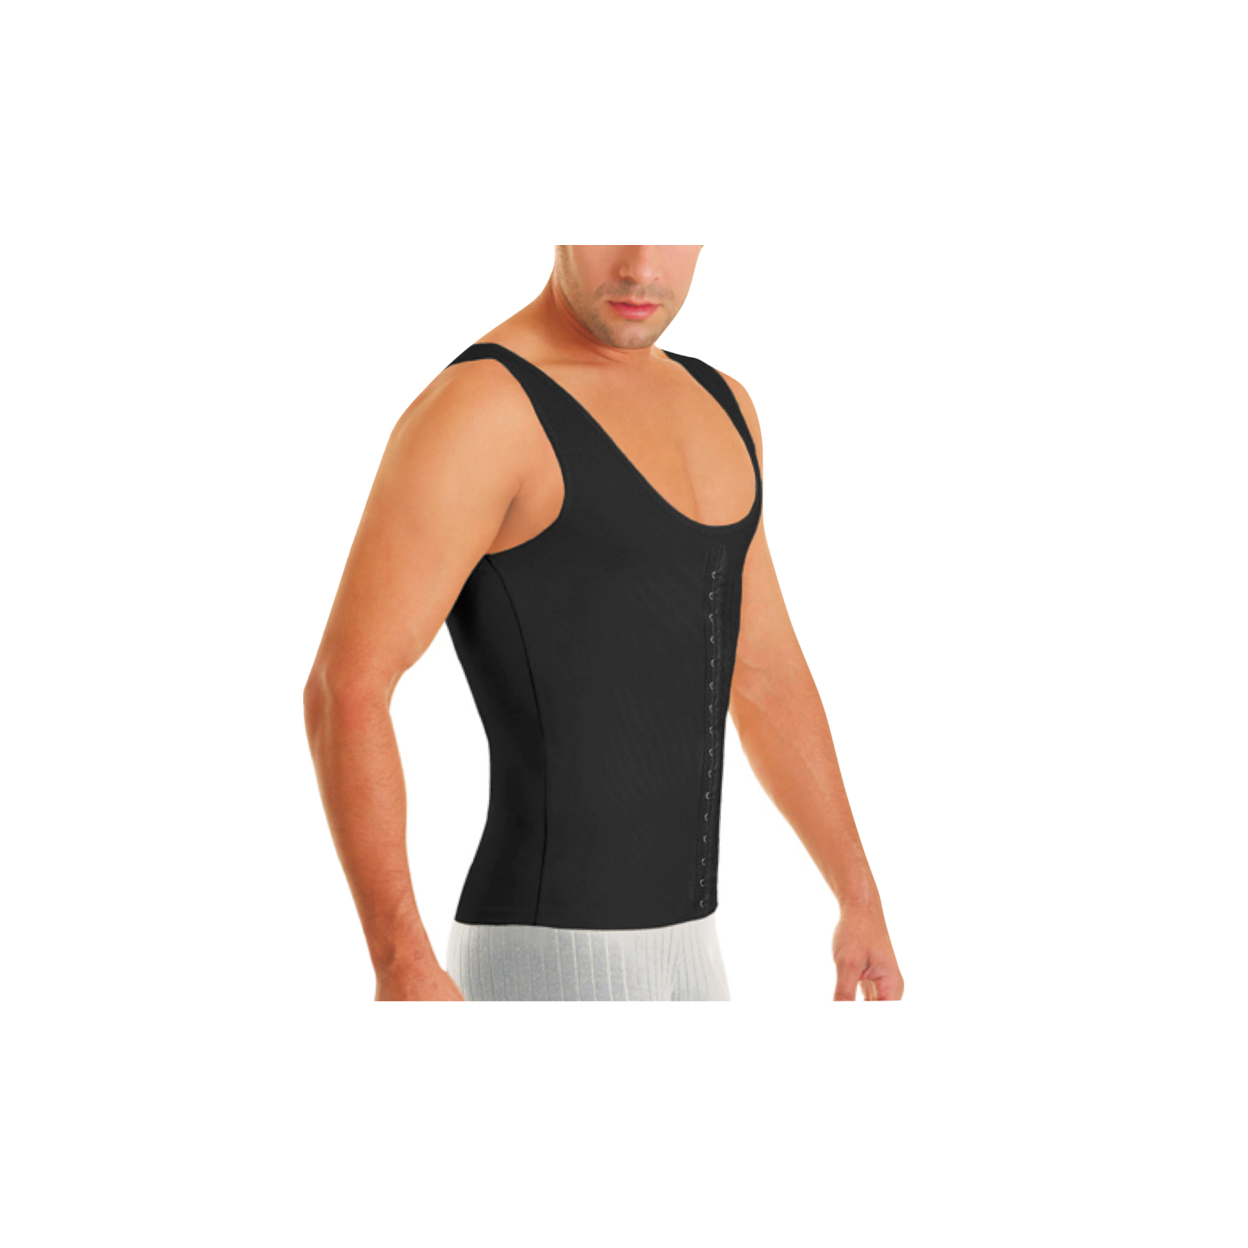 Men Waistcoat High-Compression Body Shaper In Regular And Plus Sizes - Nude, Small